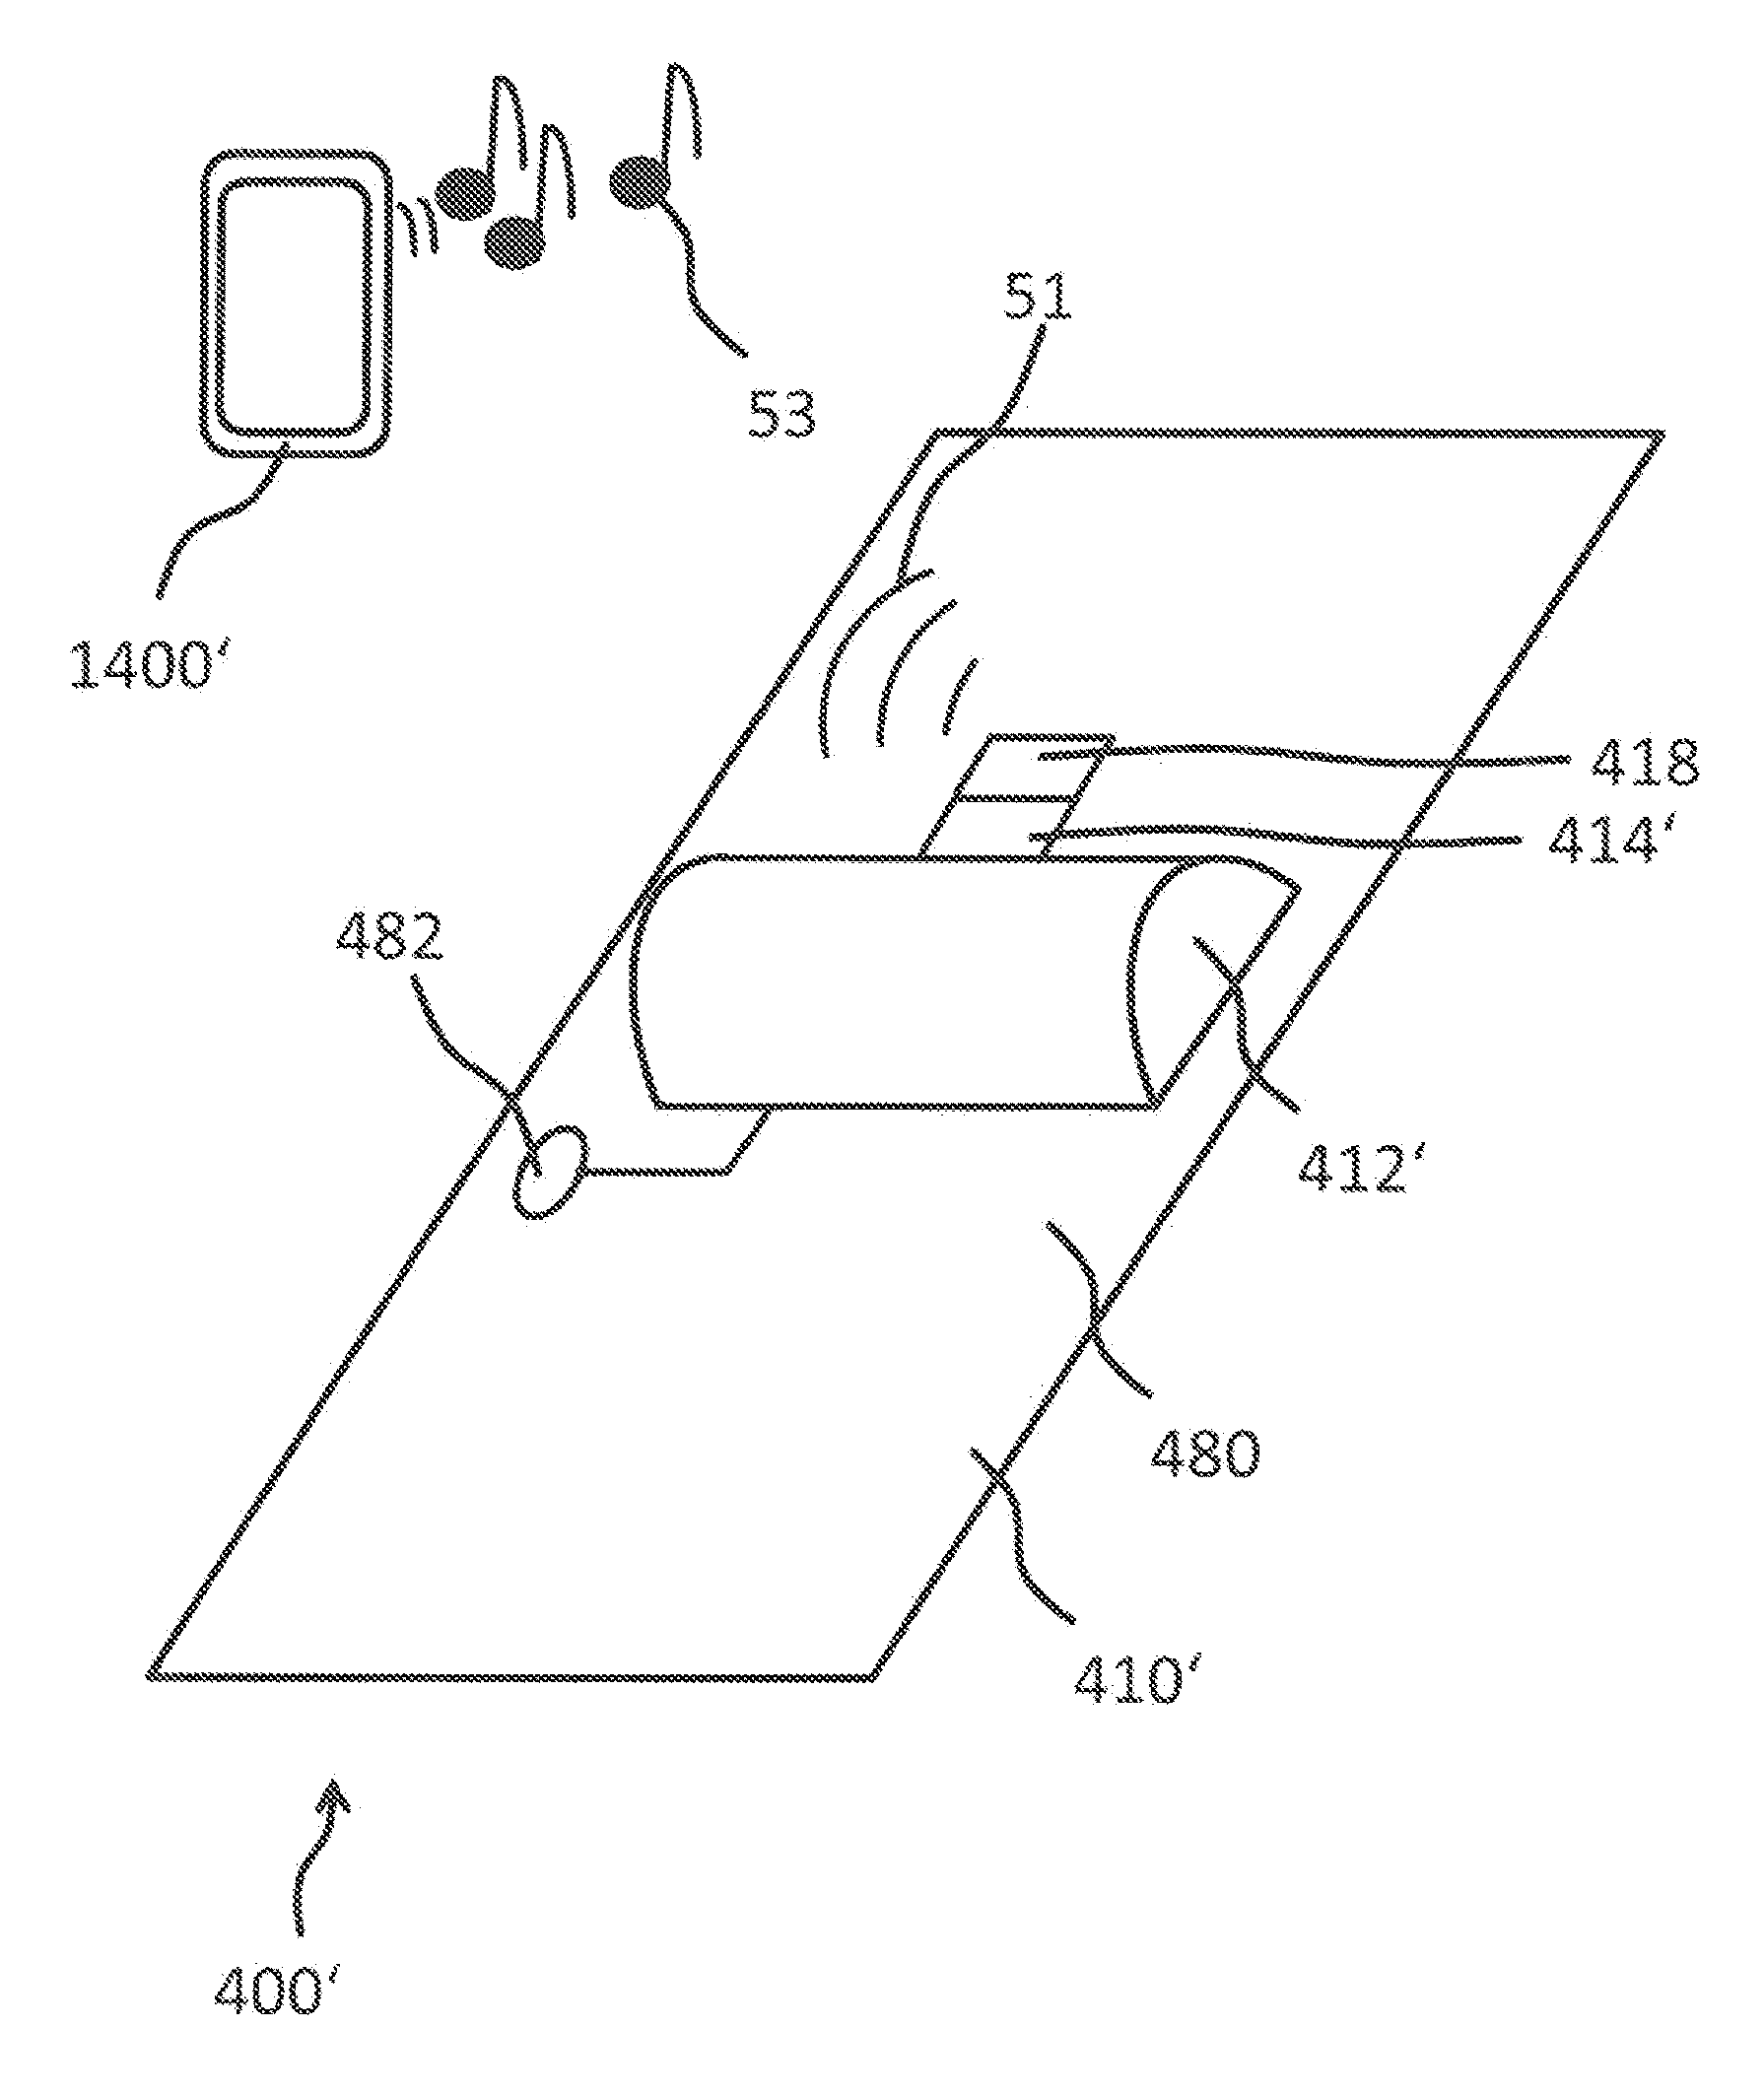 Training device, system and method for monitoring a physical exercise